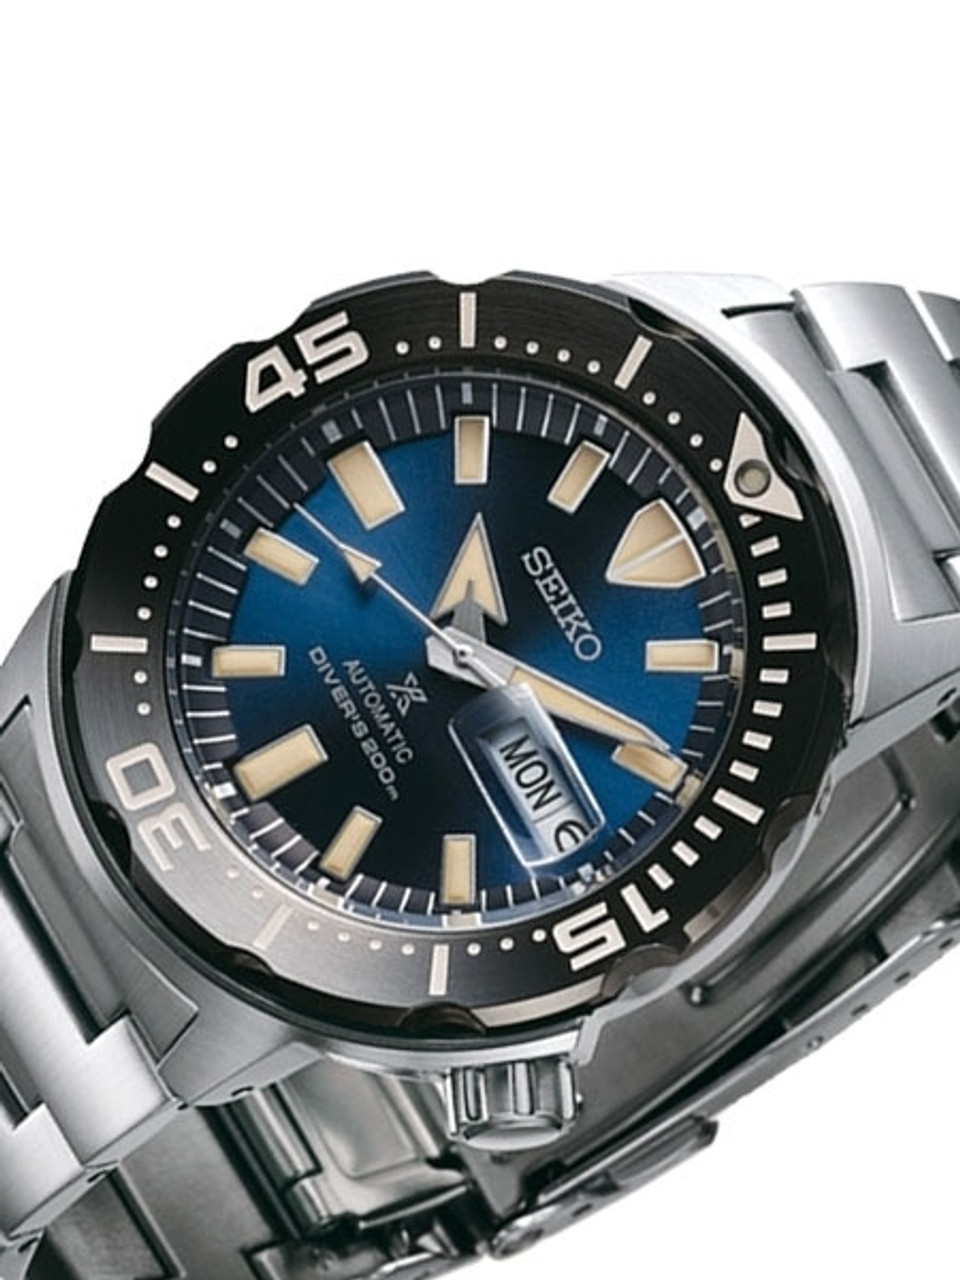 Seiko SRPD25 2019 Monster with new case design and 24-Jewel Automatic  Movement